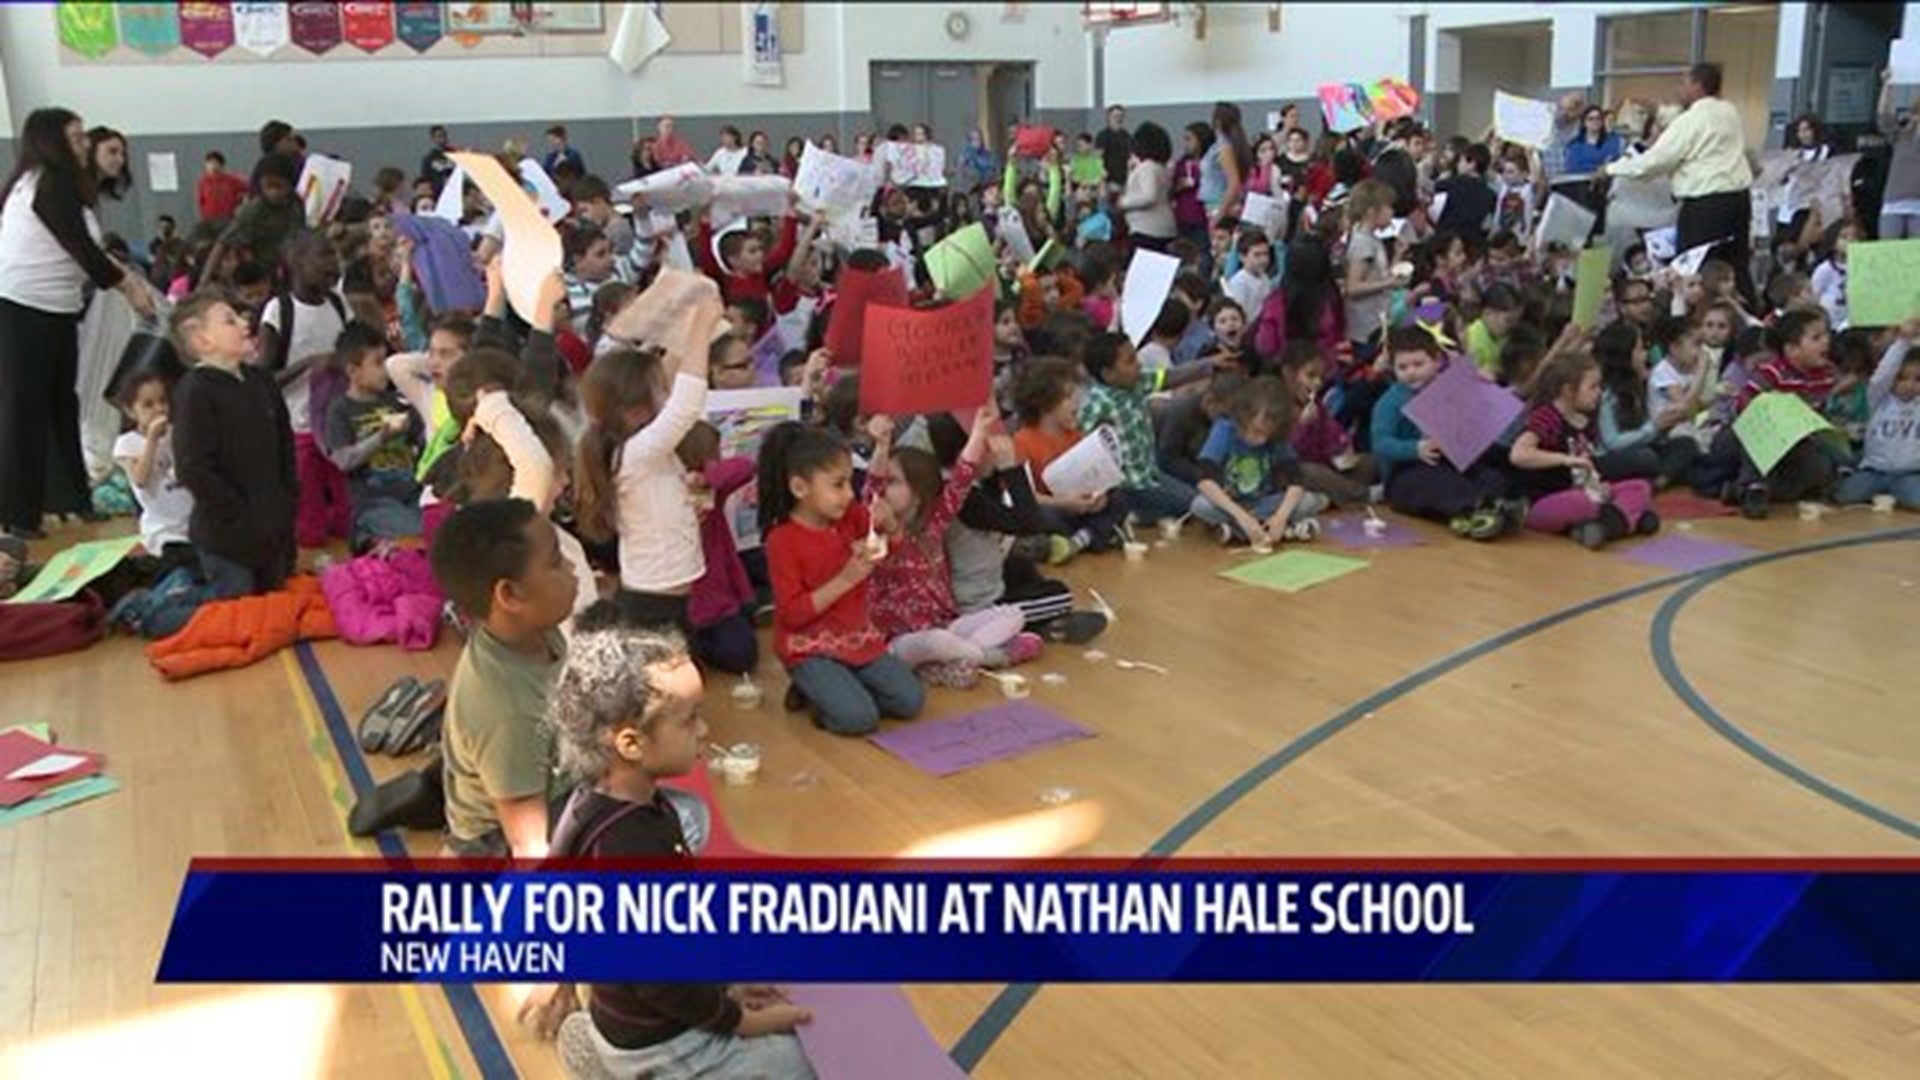 Fradiani Frenzy takes over Nathan Hale school